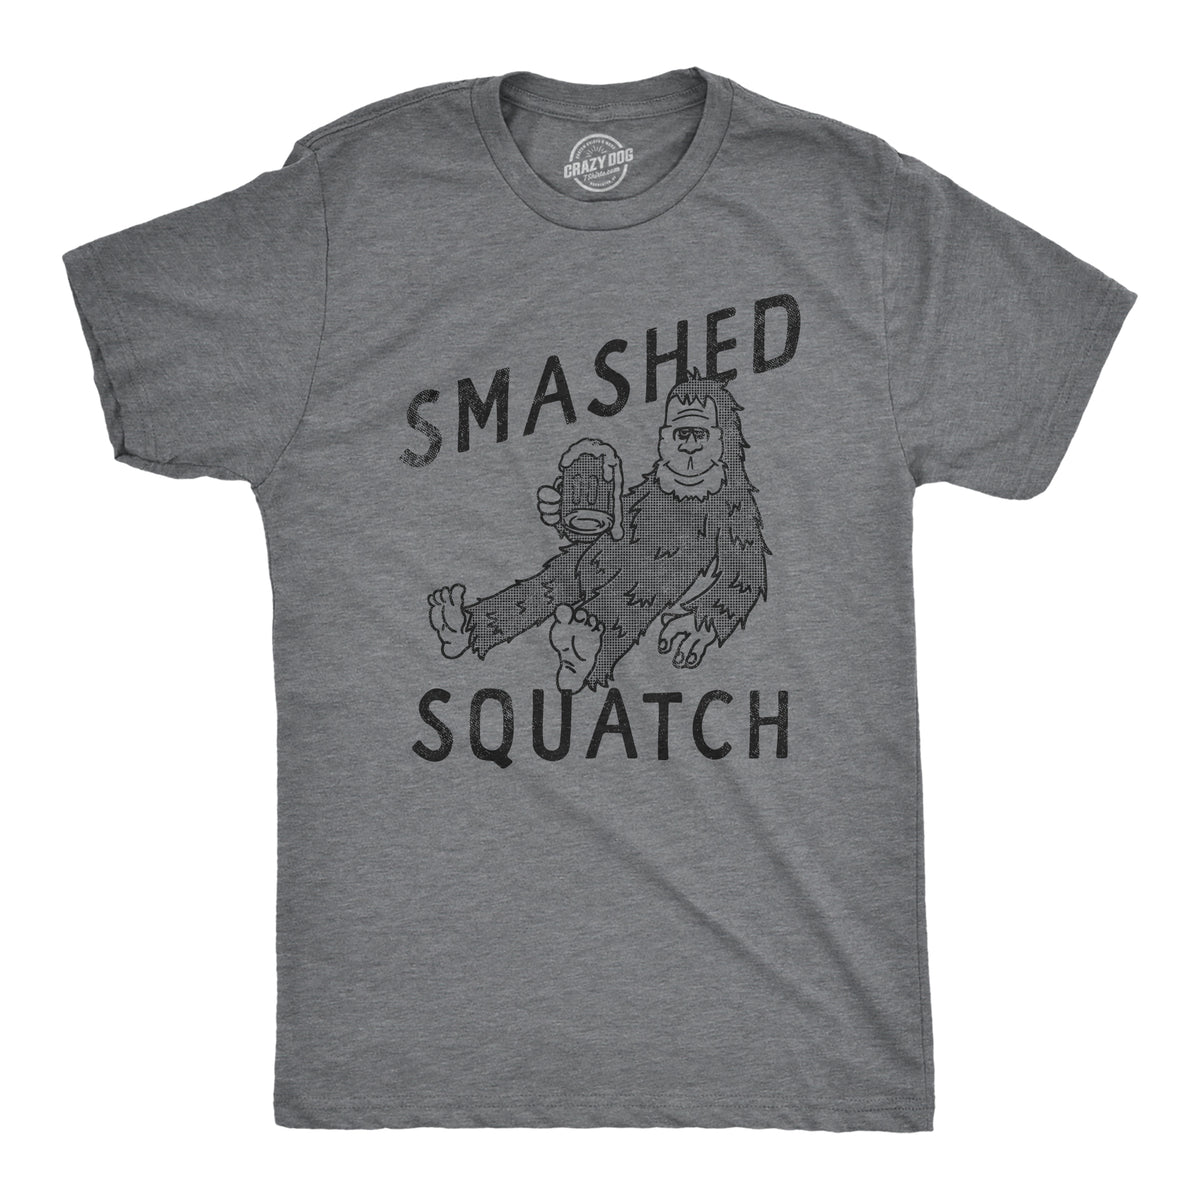 Funny Dark Heather Grey - SQUATCH Smashed Squatch Mens T Shirt Nerdy Beer Drinking Tee